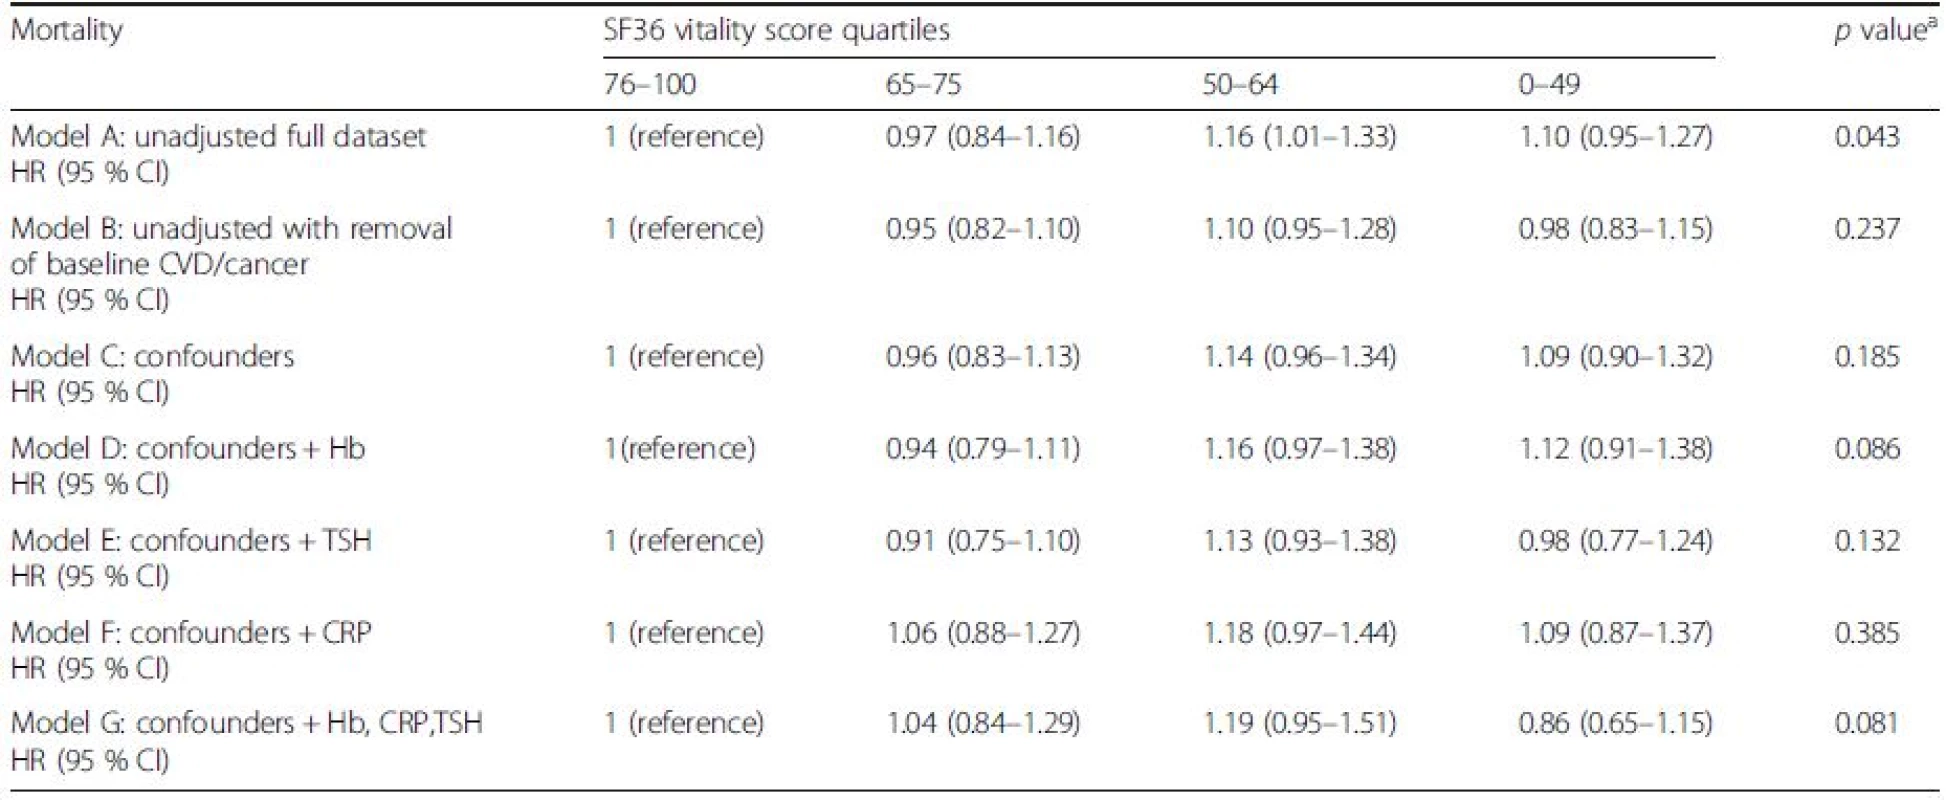 The risks of cancer related mortality by SF36 vitality score in the EPIC-Norfolk study